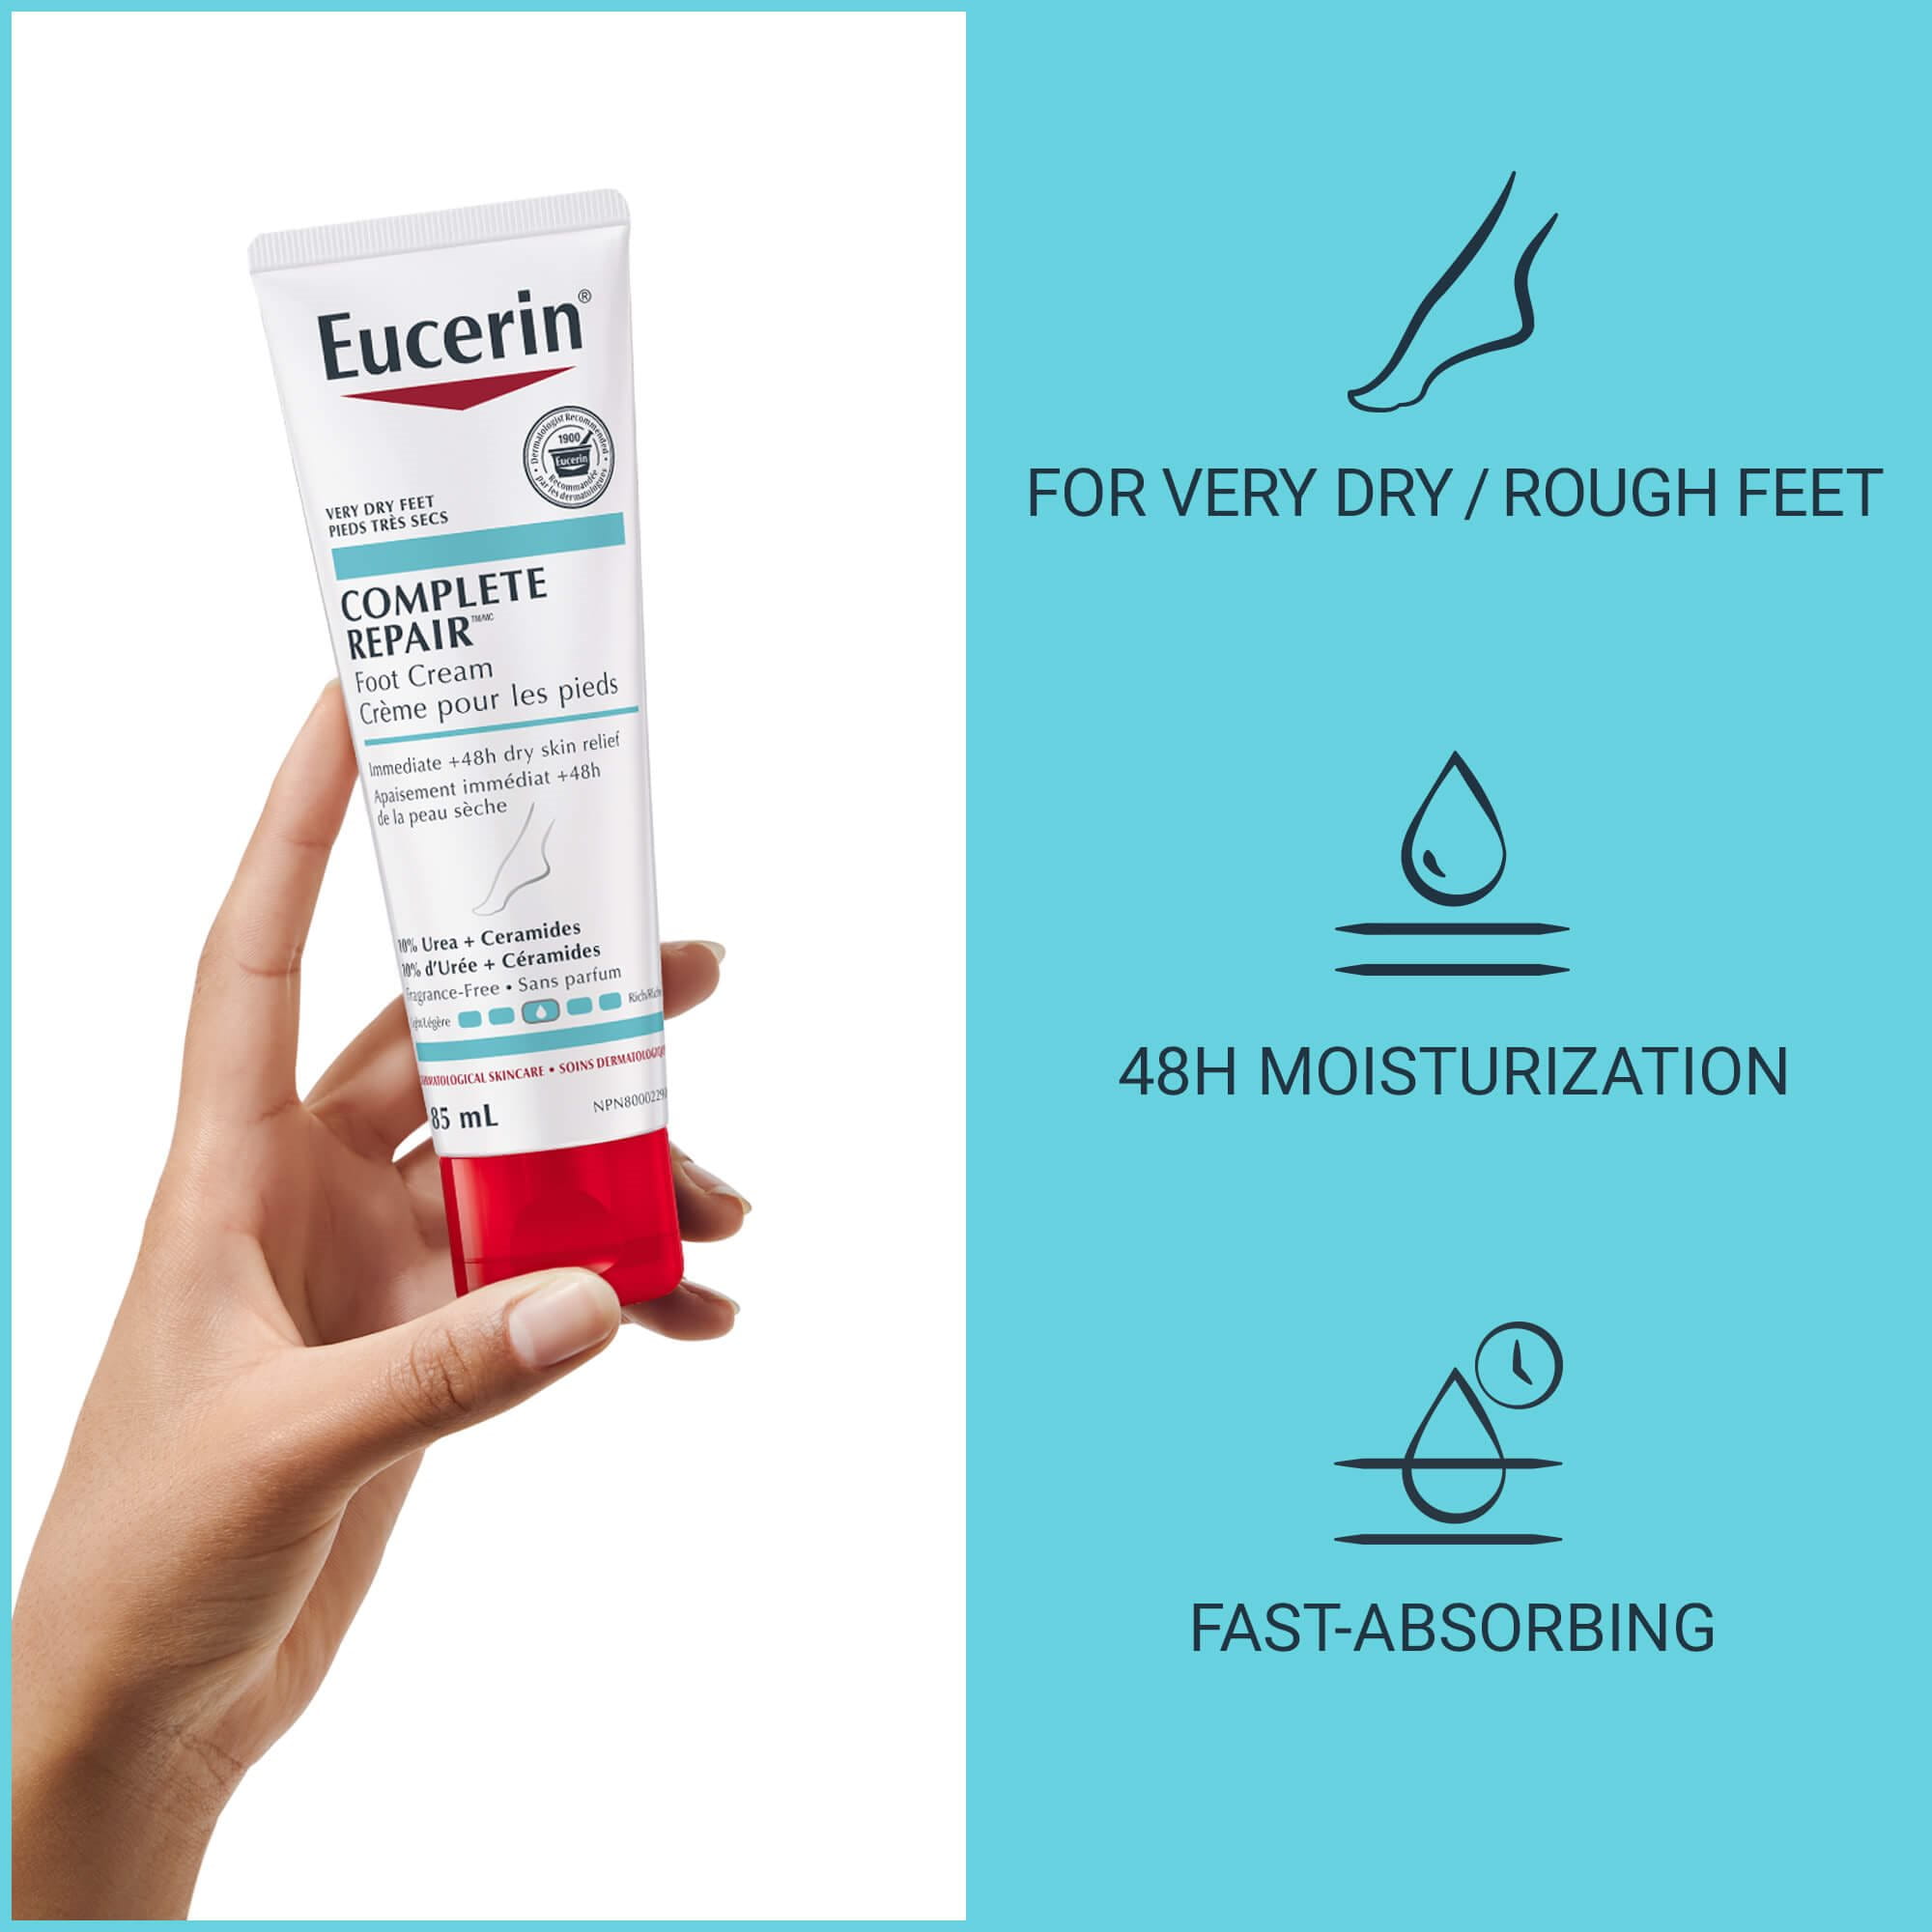 Image of a woman holding a tube of Eucerin Complete Repair Foot Cream.